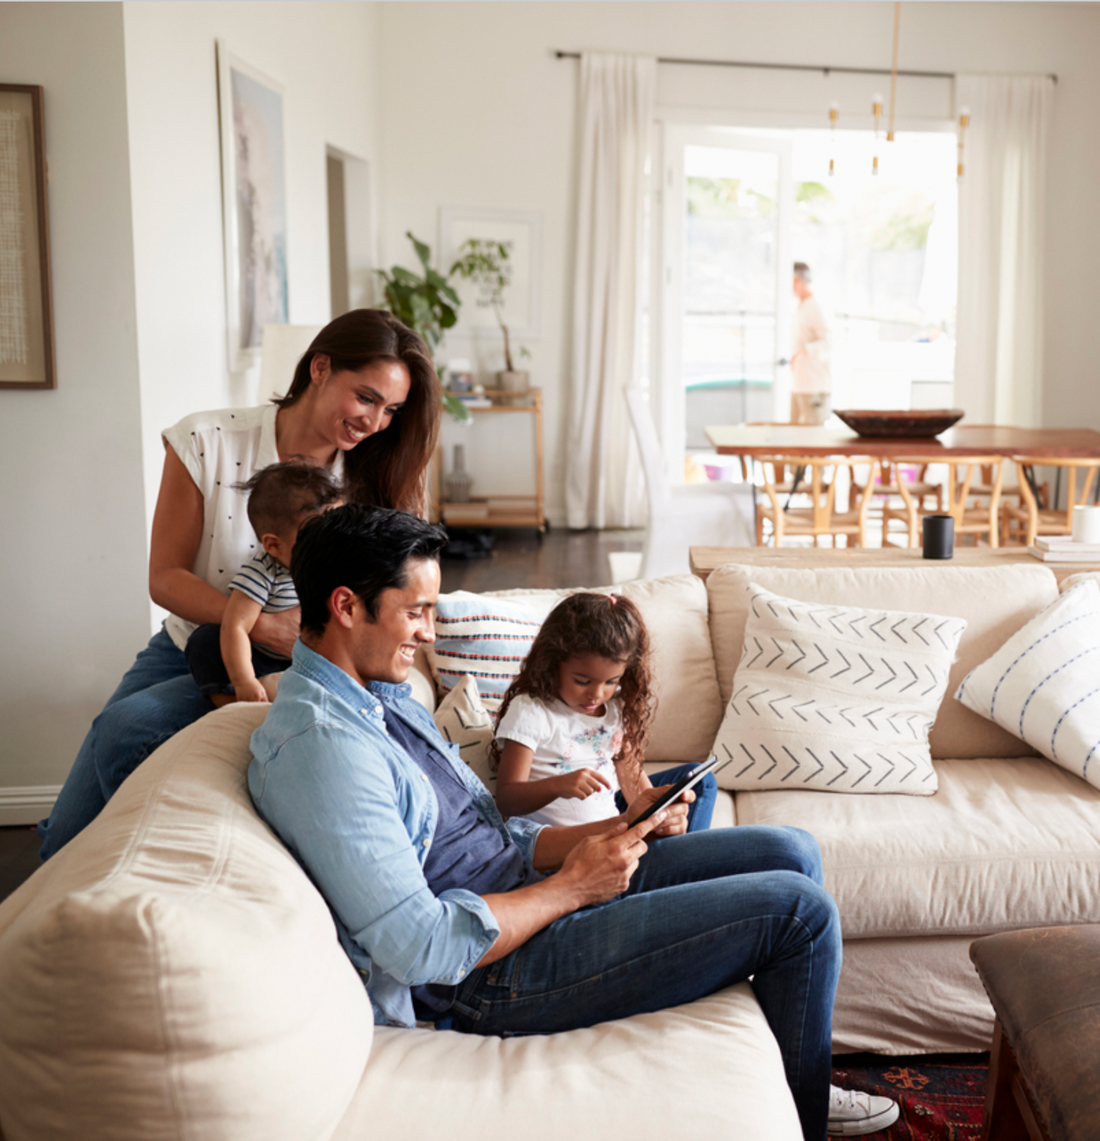 Why Millennial Parents Love Smart Tech & Remote Monitoring